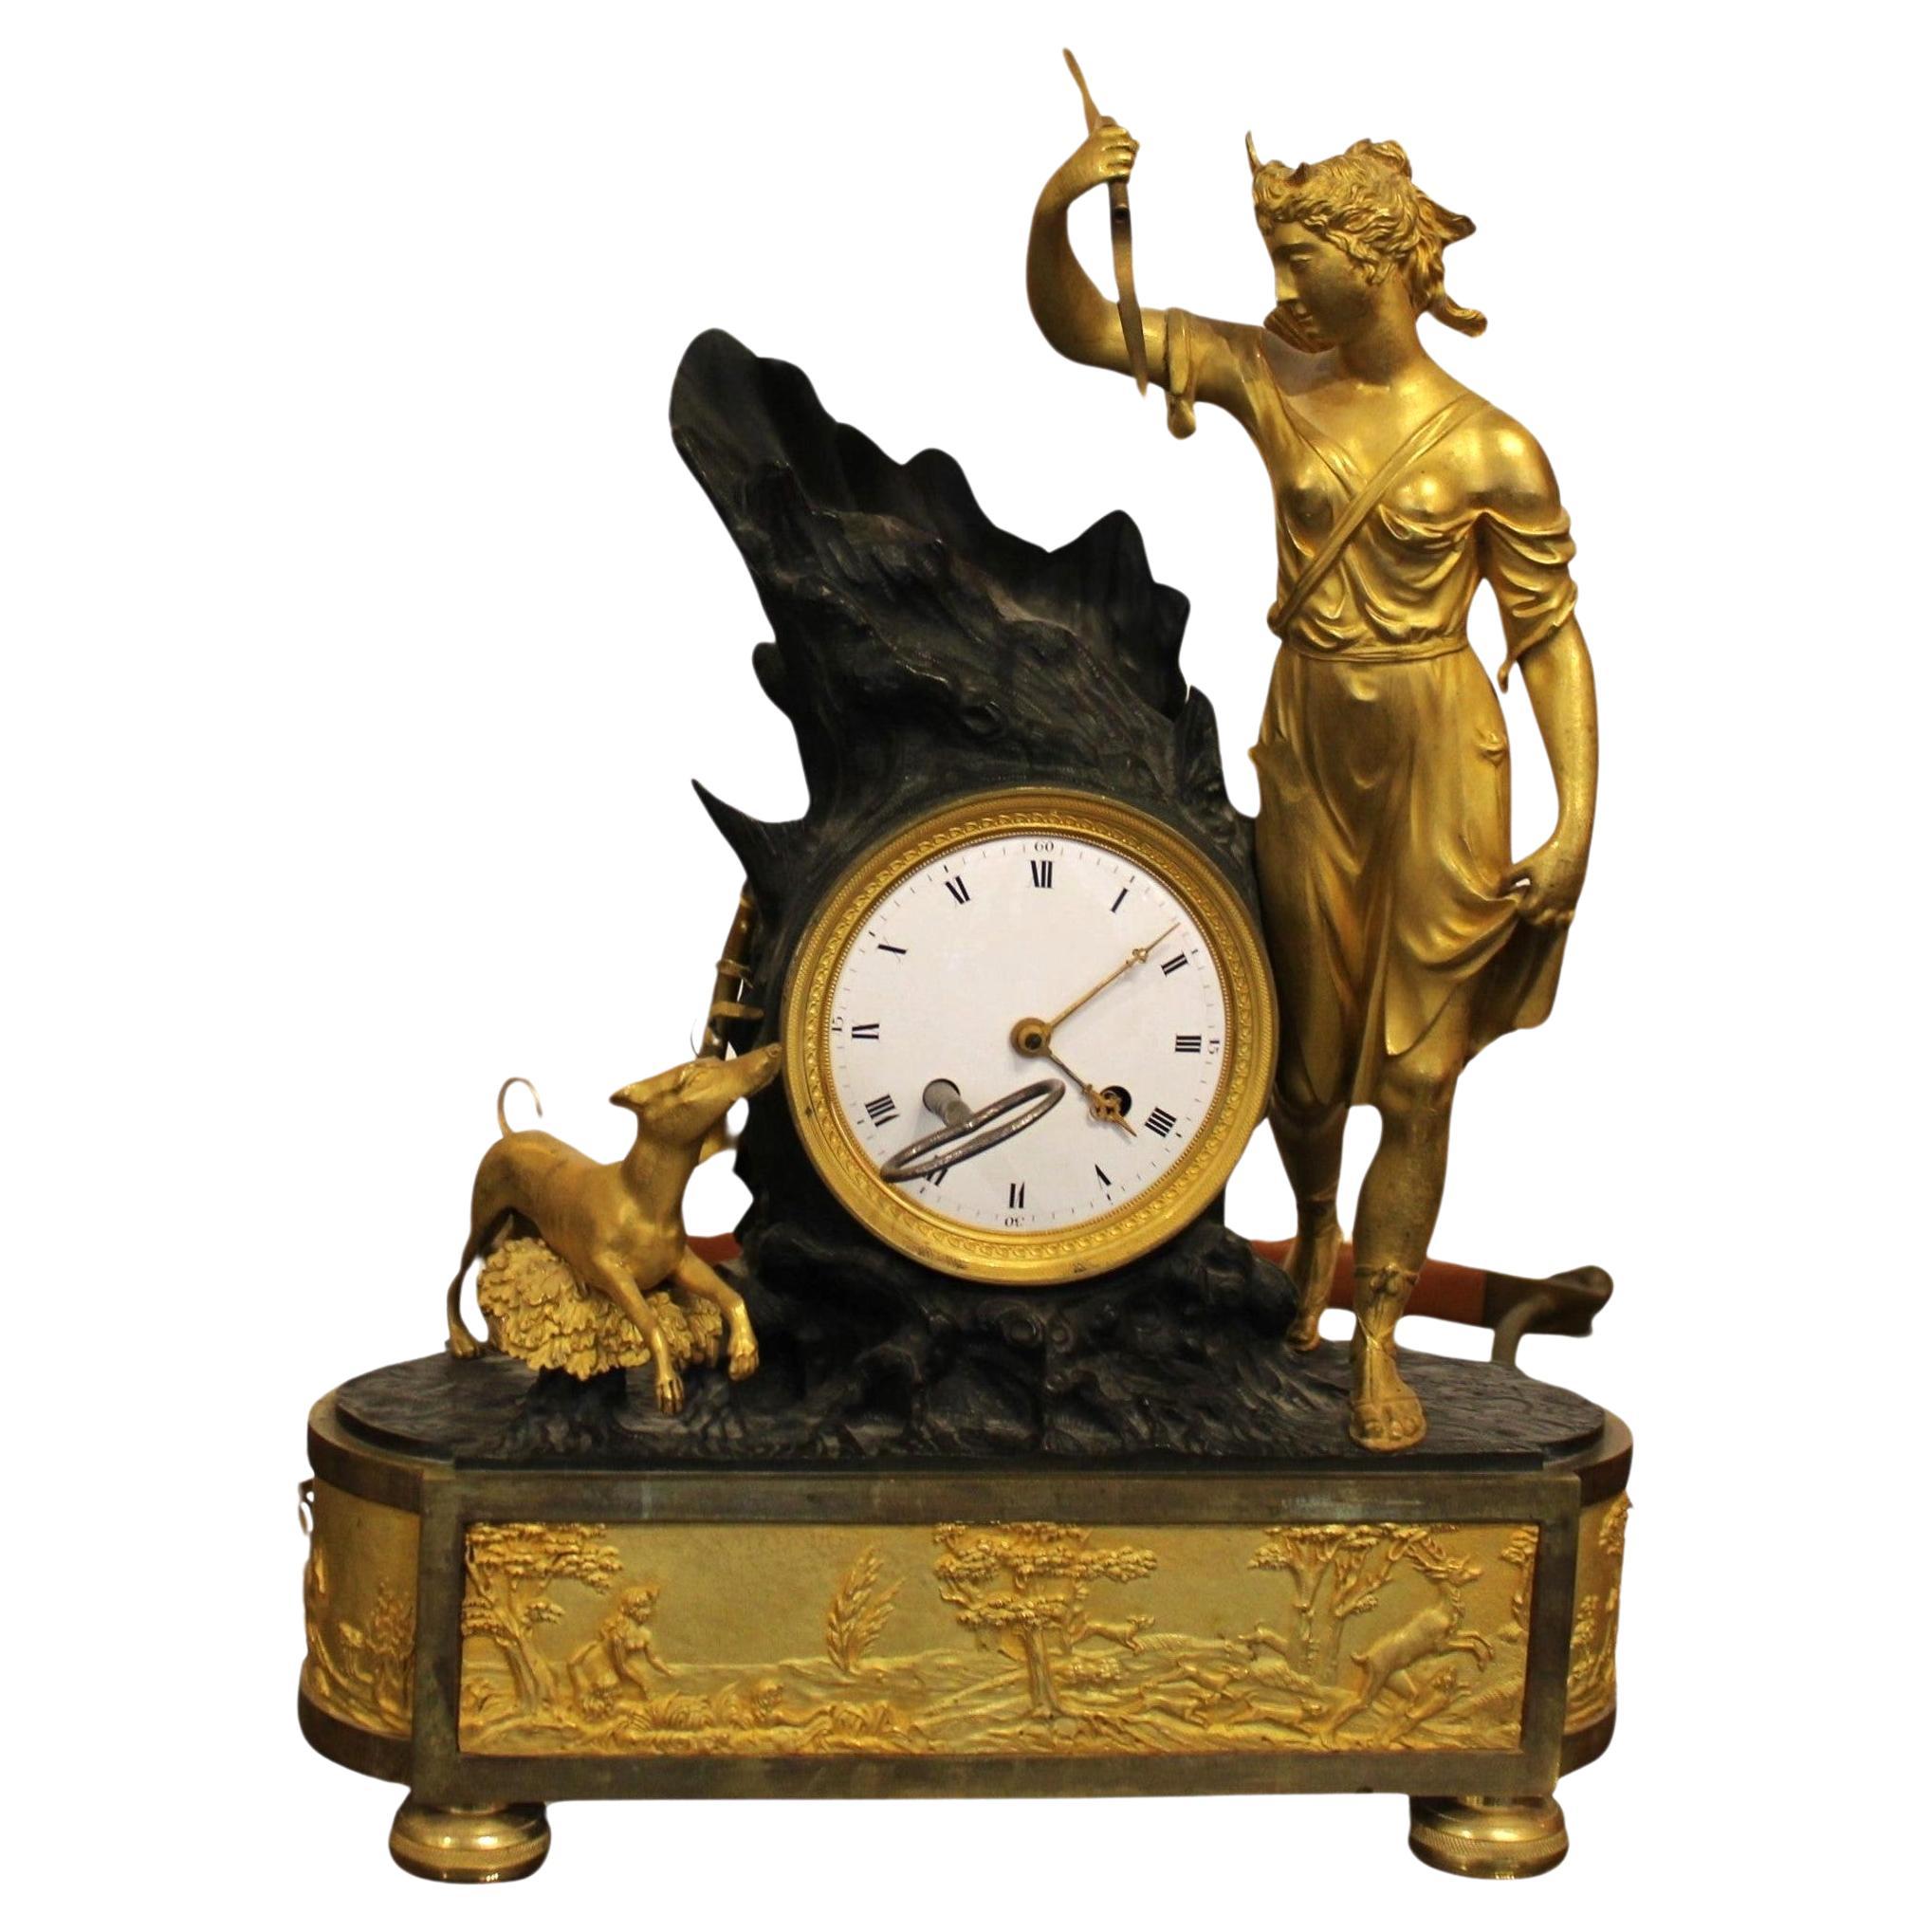 Gilded bronze clock, early 19th century